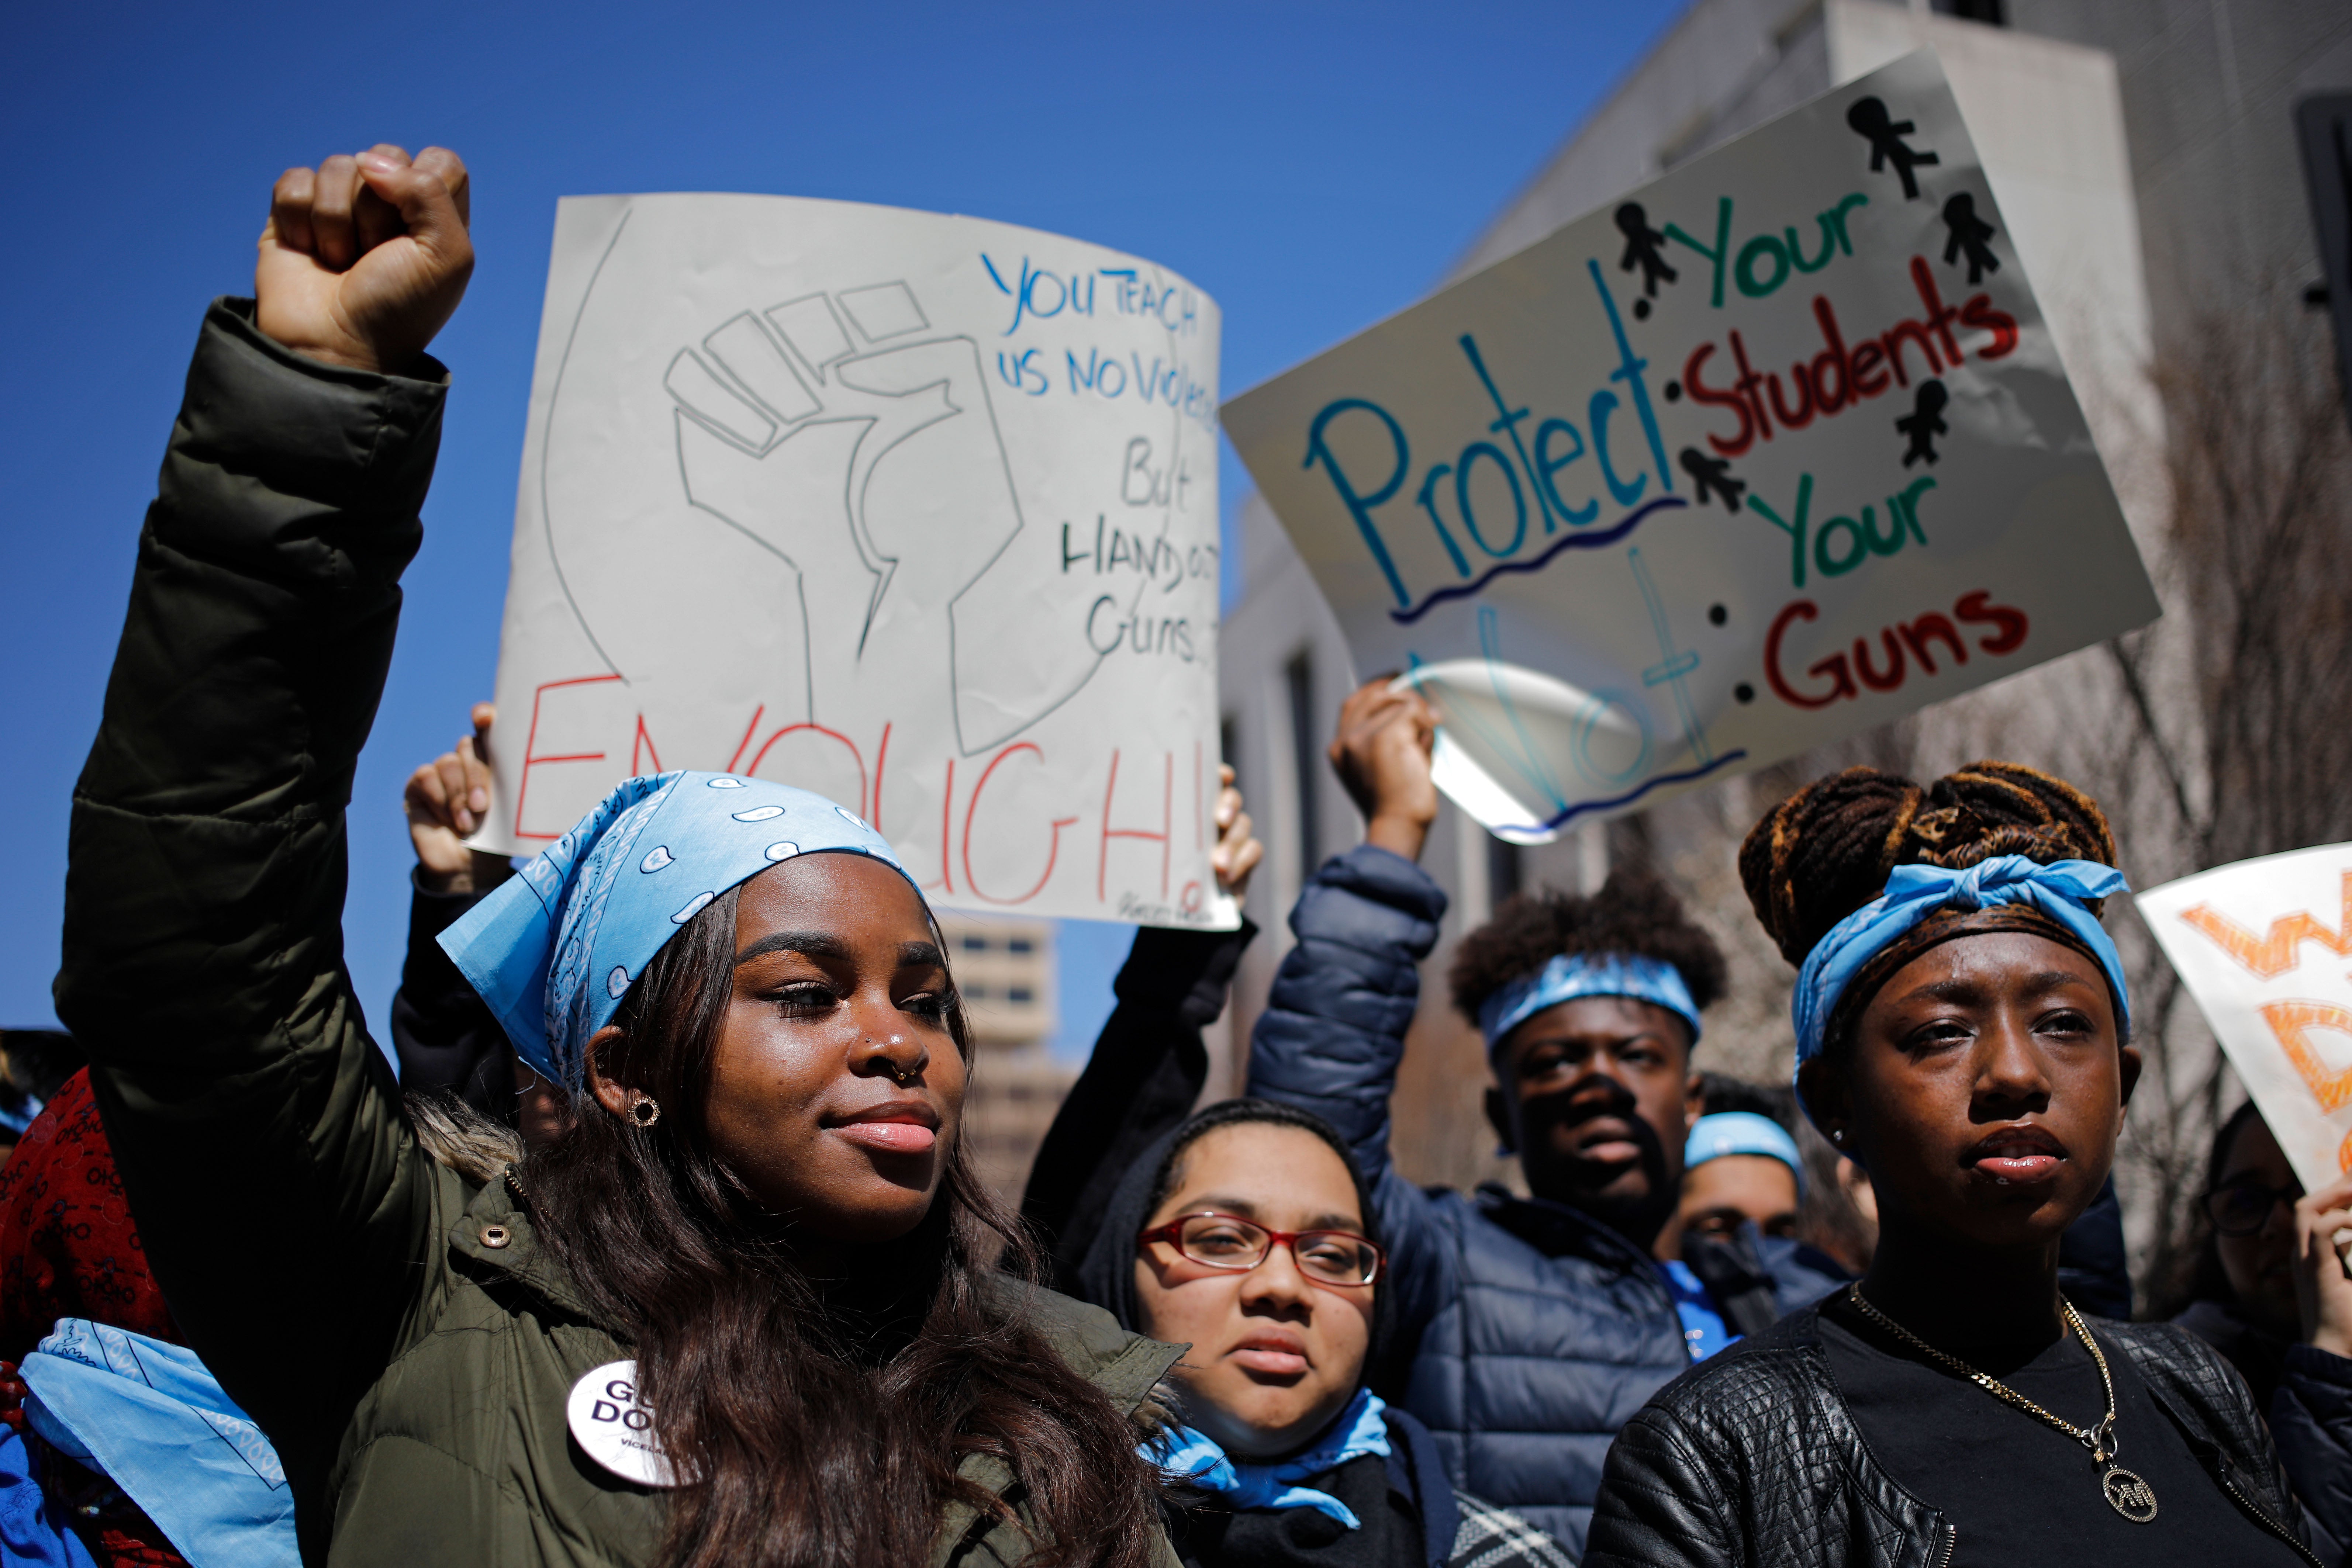 Black Youth Made Their Presence Felt At The 'March For Our Lives' Rally
